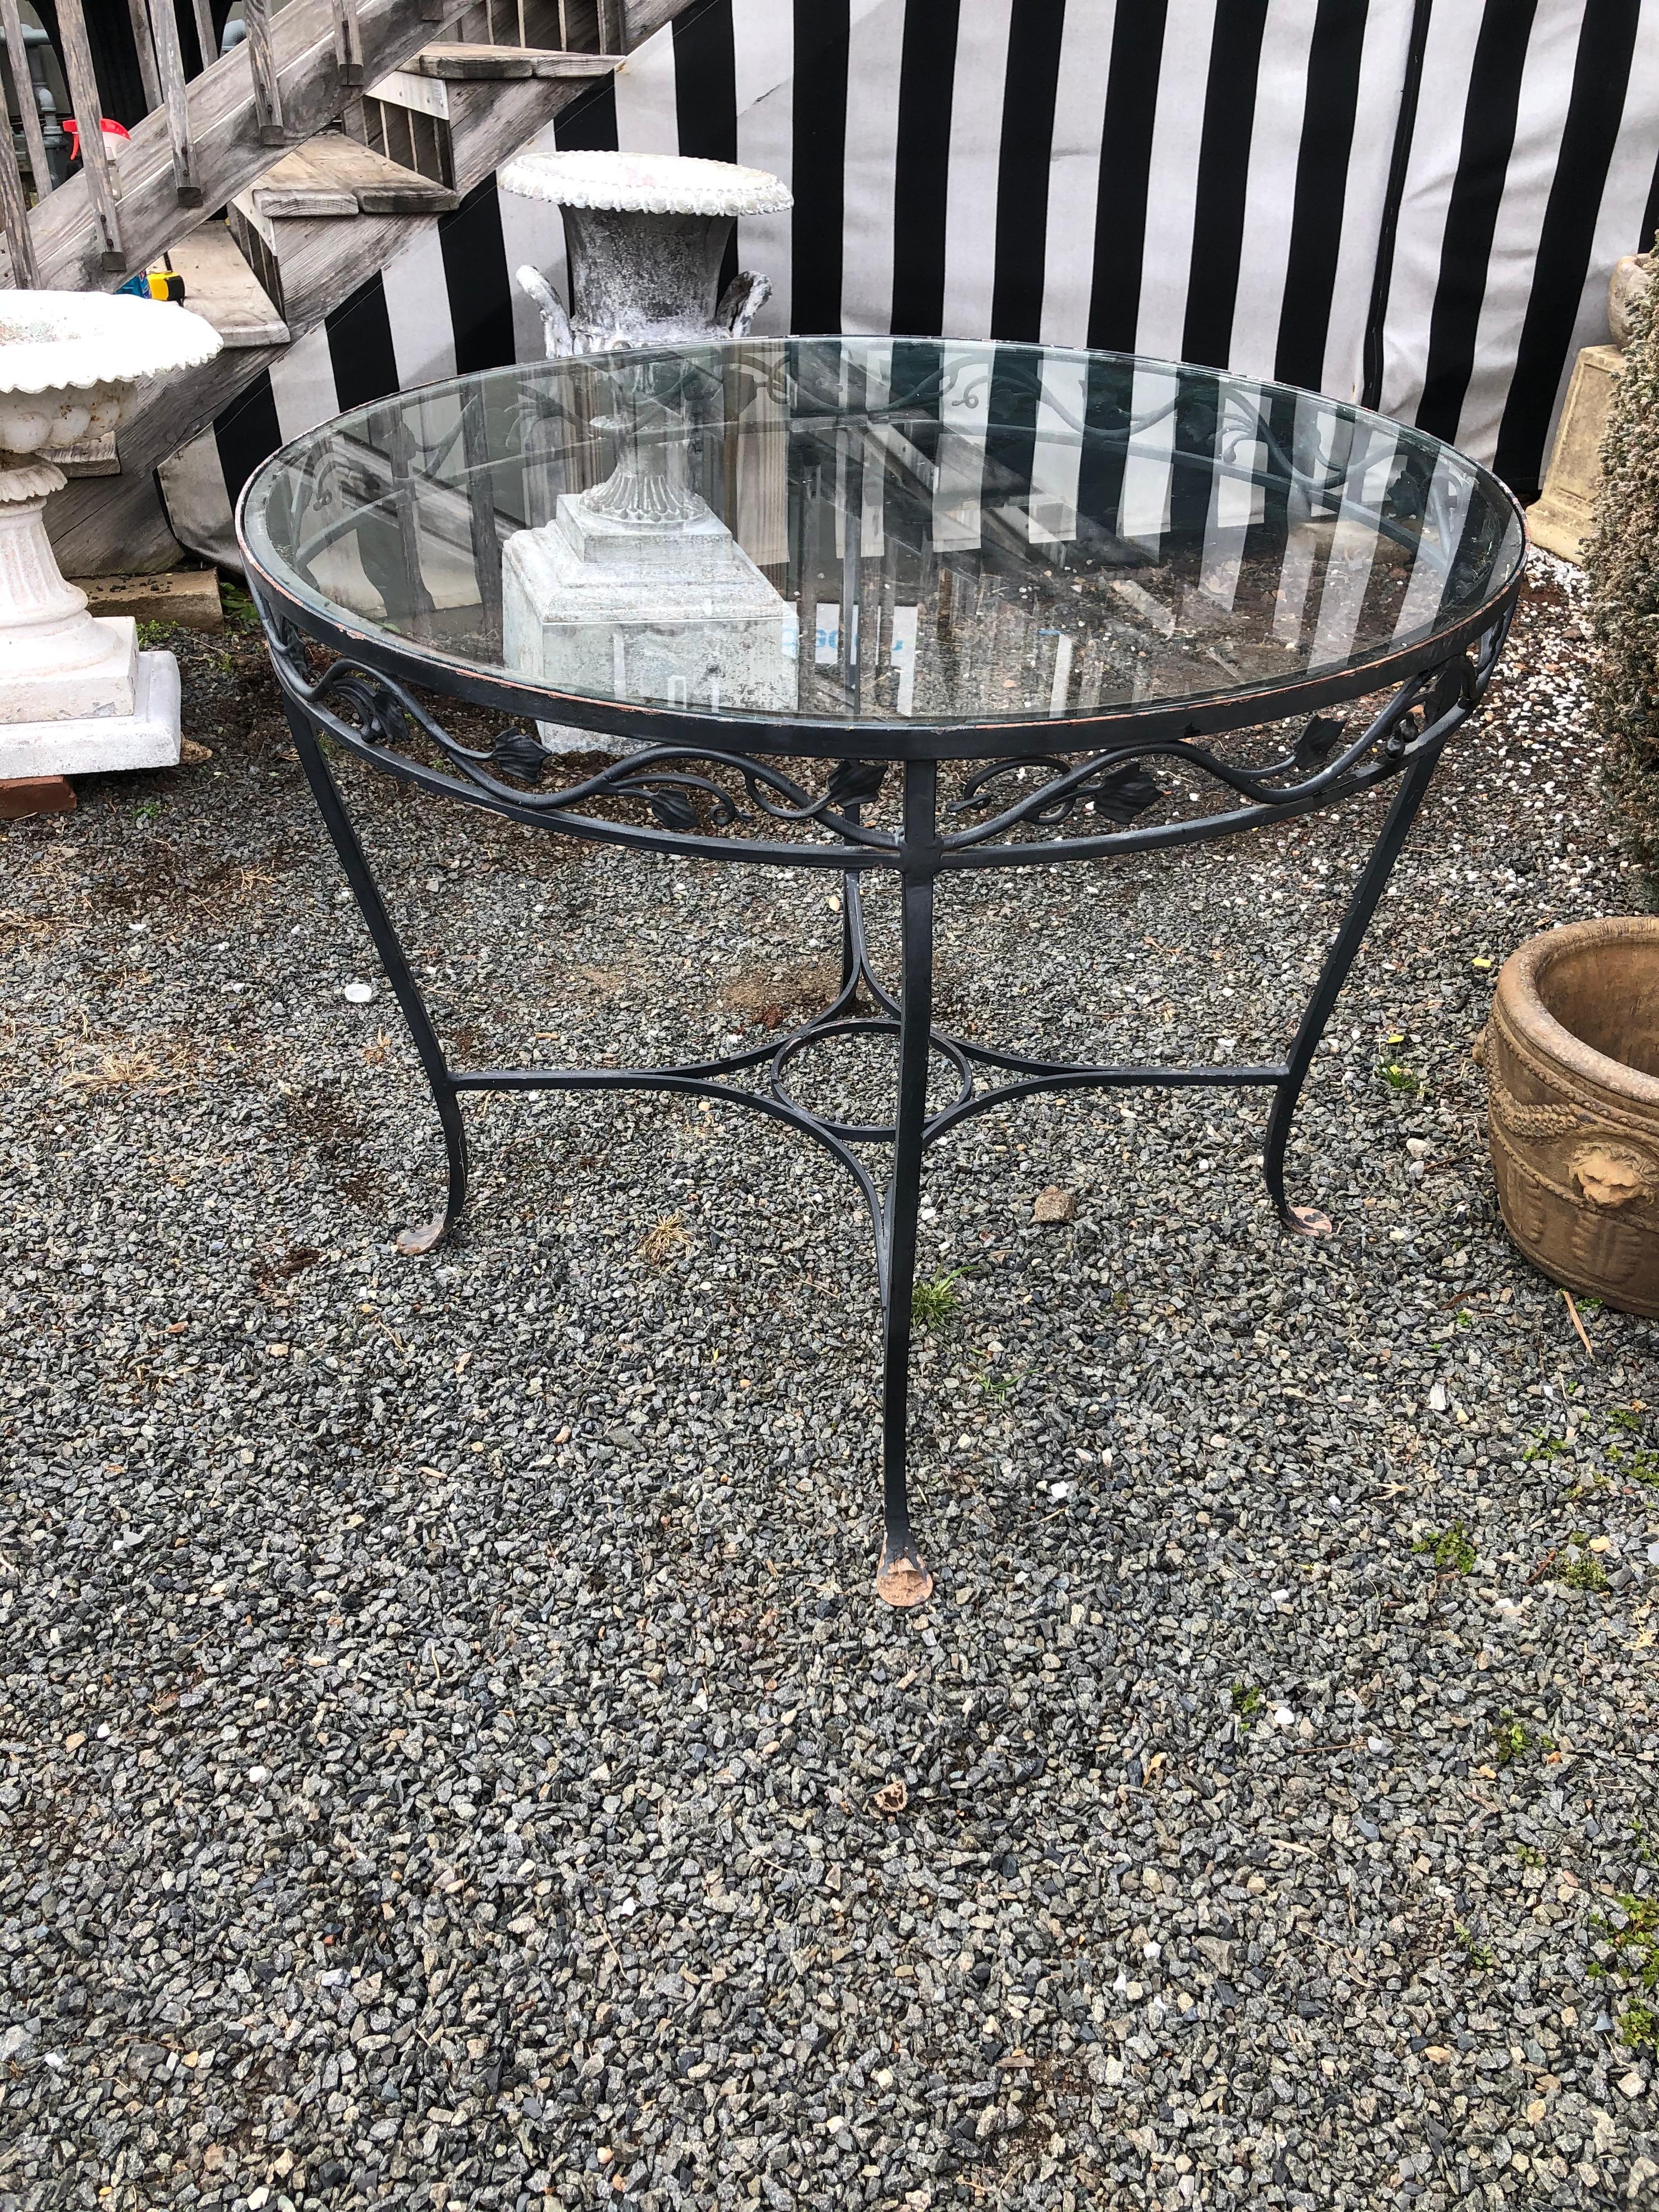 Classic round Salterini black wrought iron garden table with leaf motife and glass top.